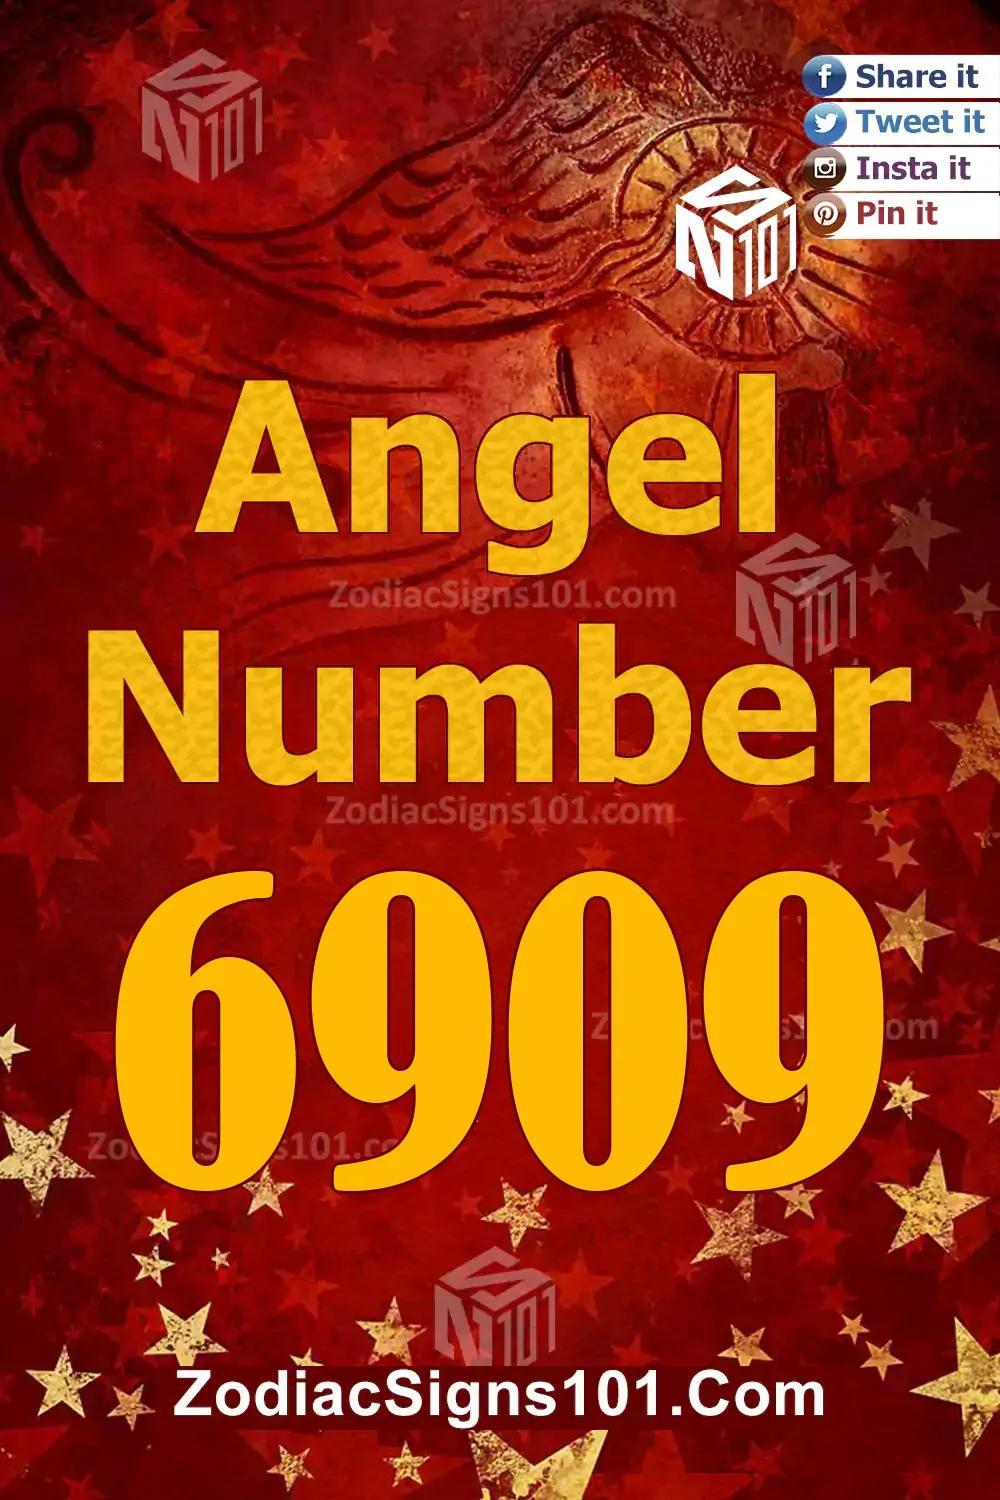 6909 Angel Number Meaning